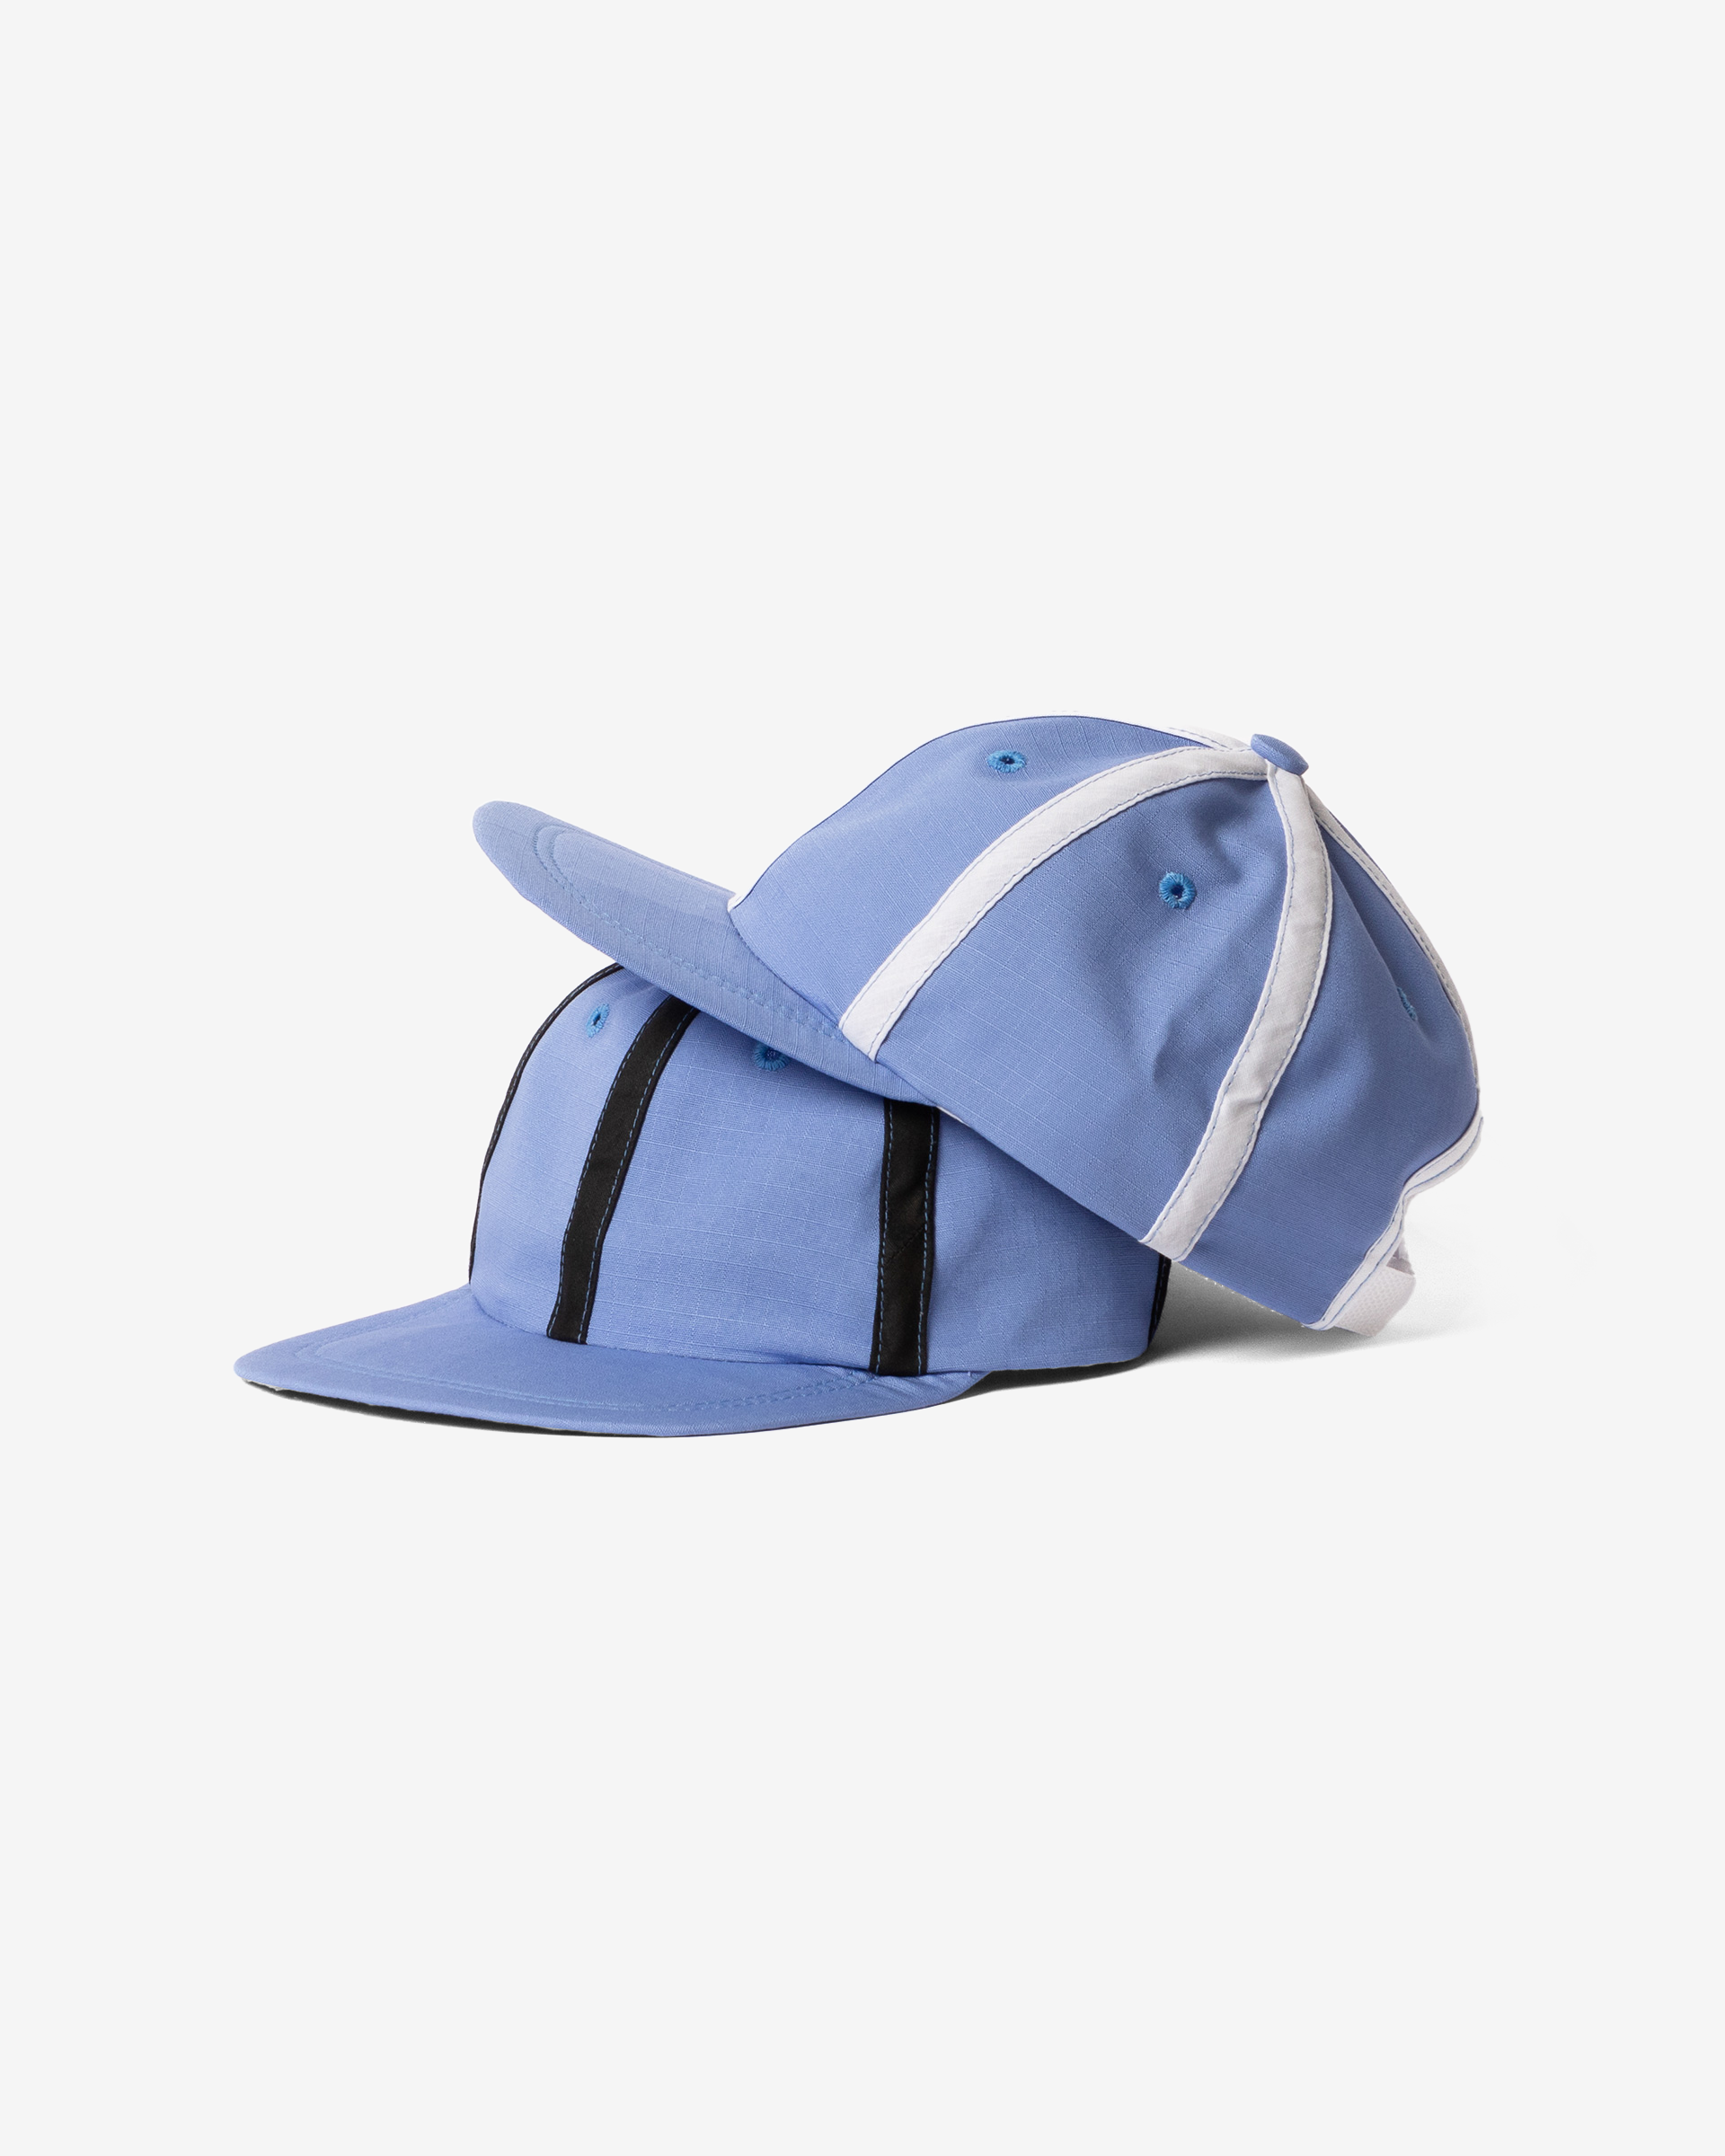 Inside Out Hat (White)